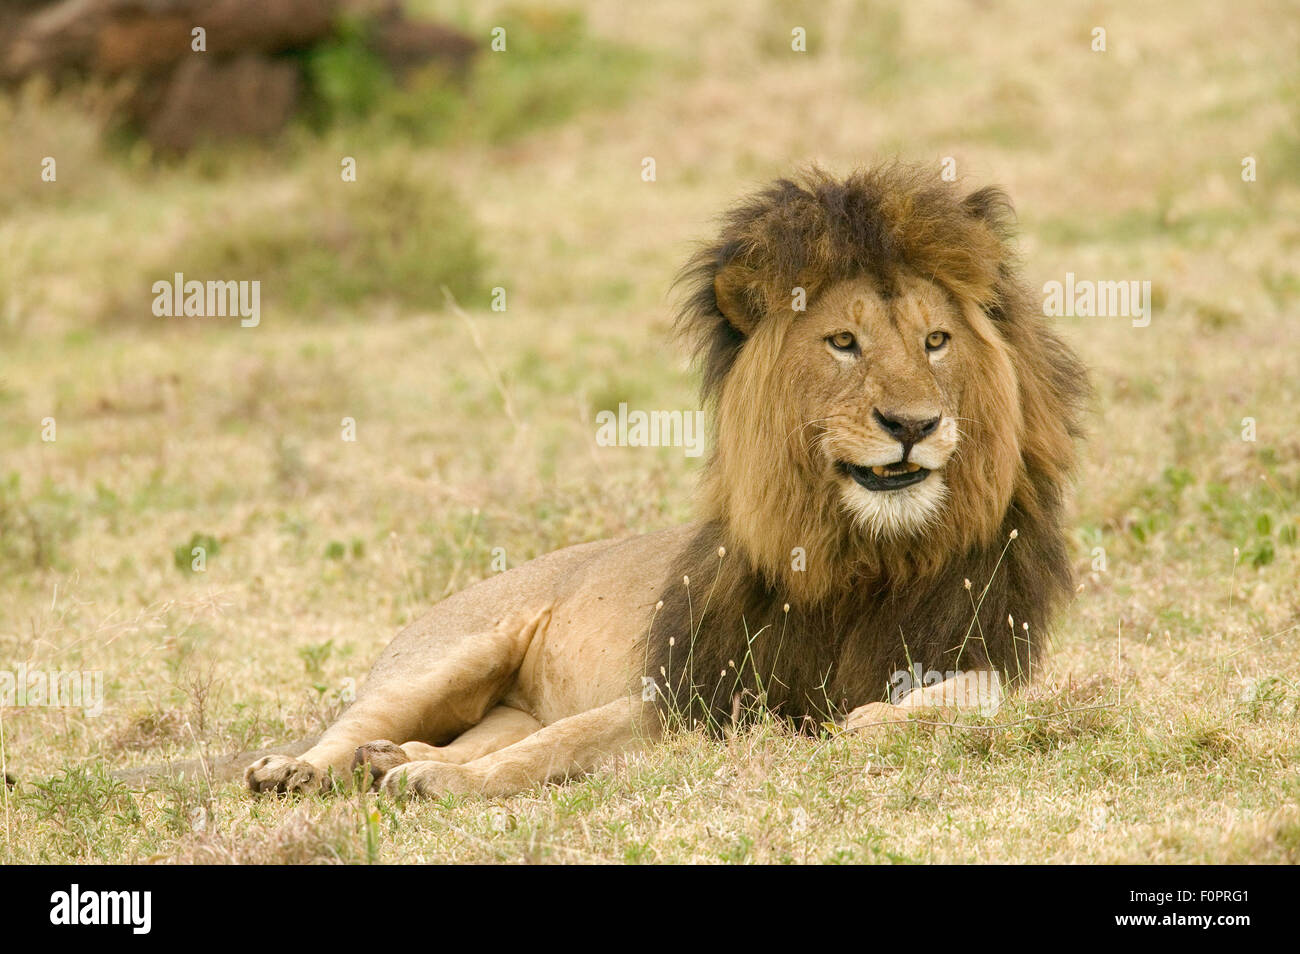 Male lion resting with a humorous expression in Ngorongoro Crater in Tanzania, Africa Stock Photo